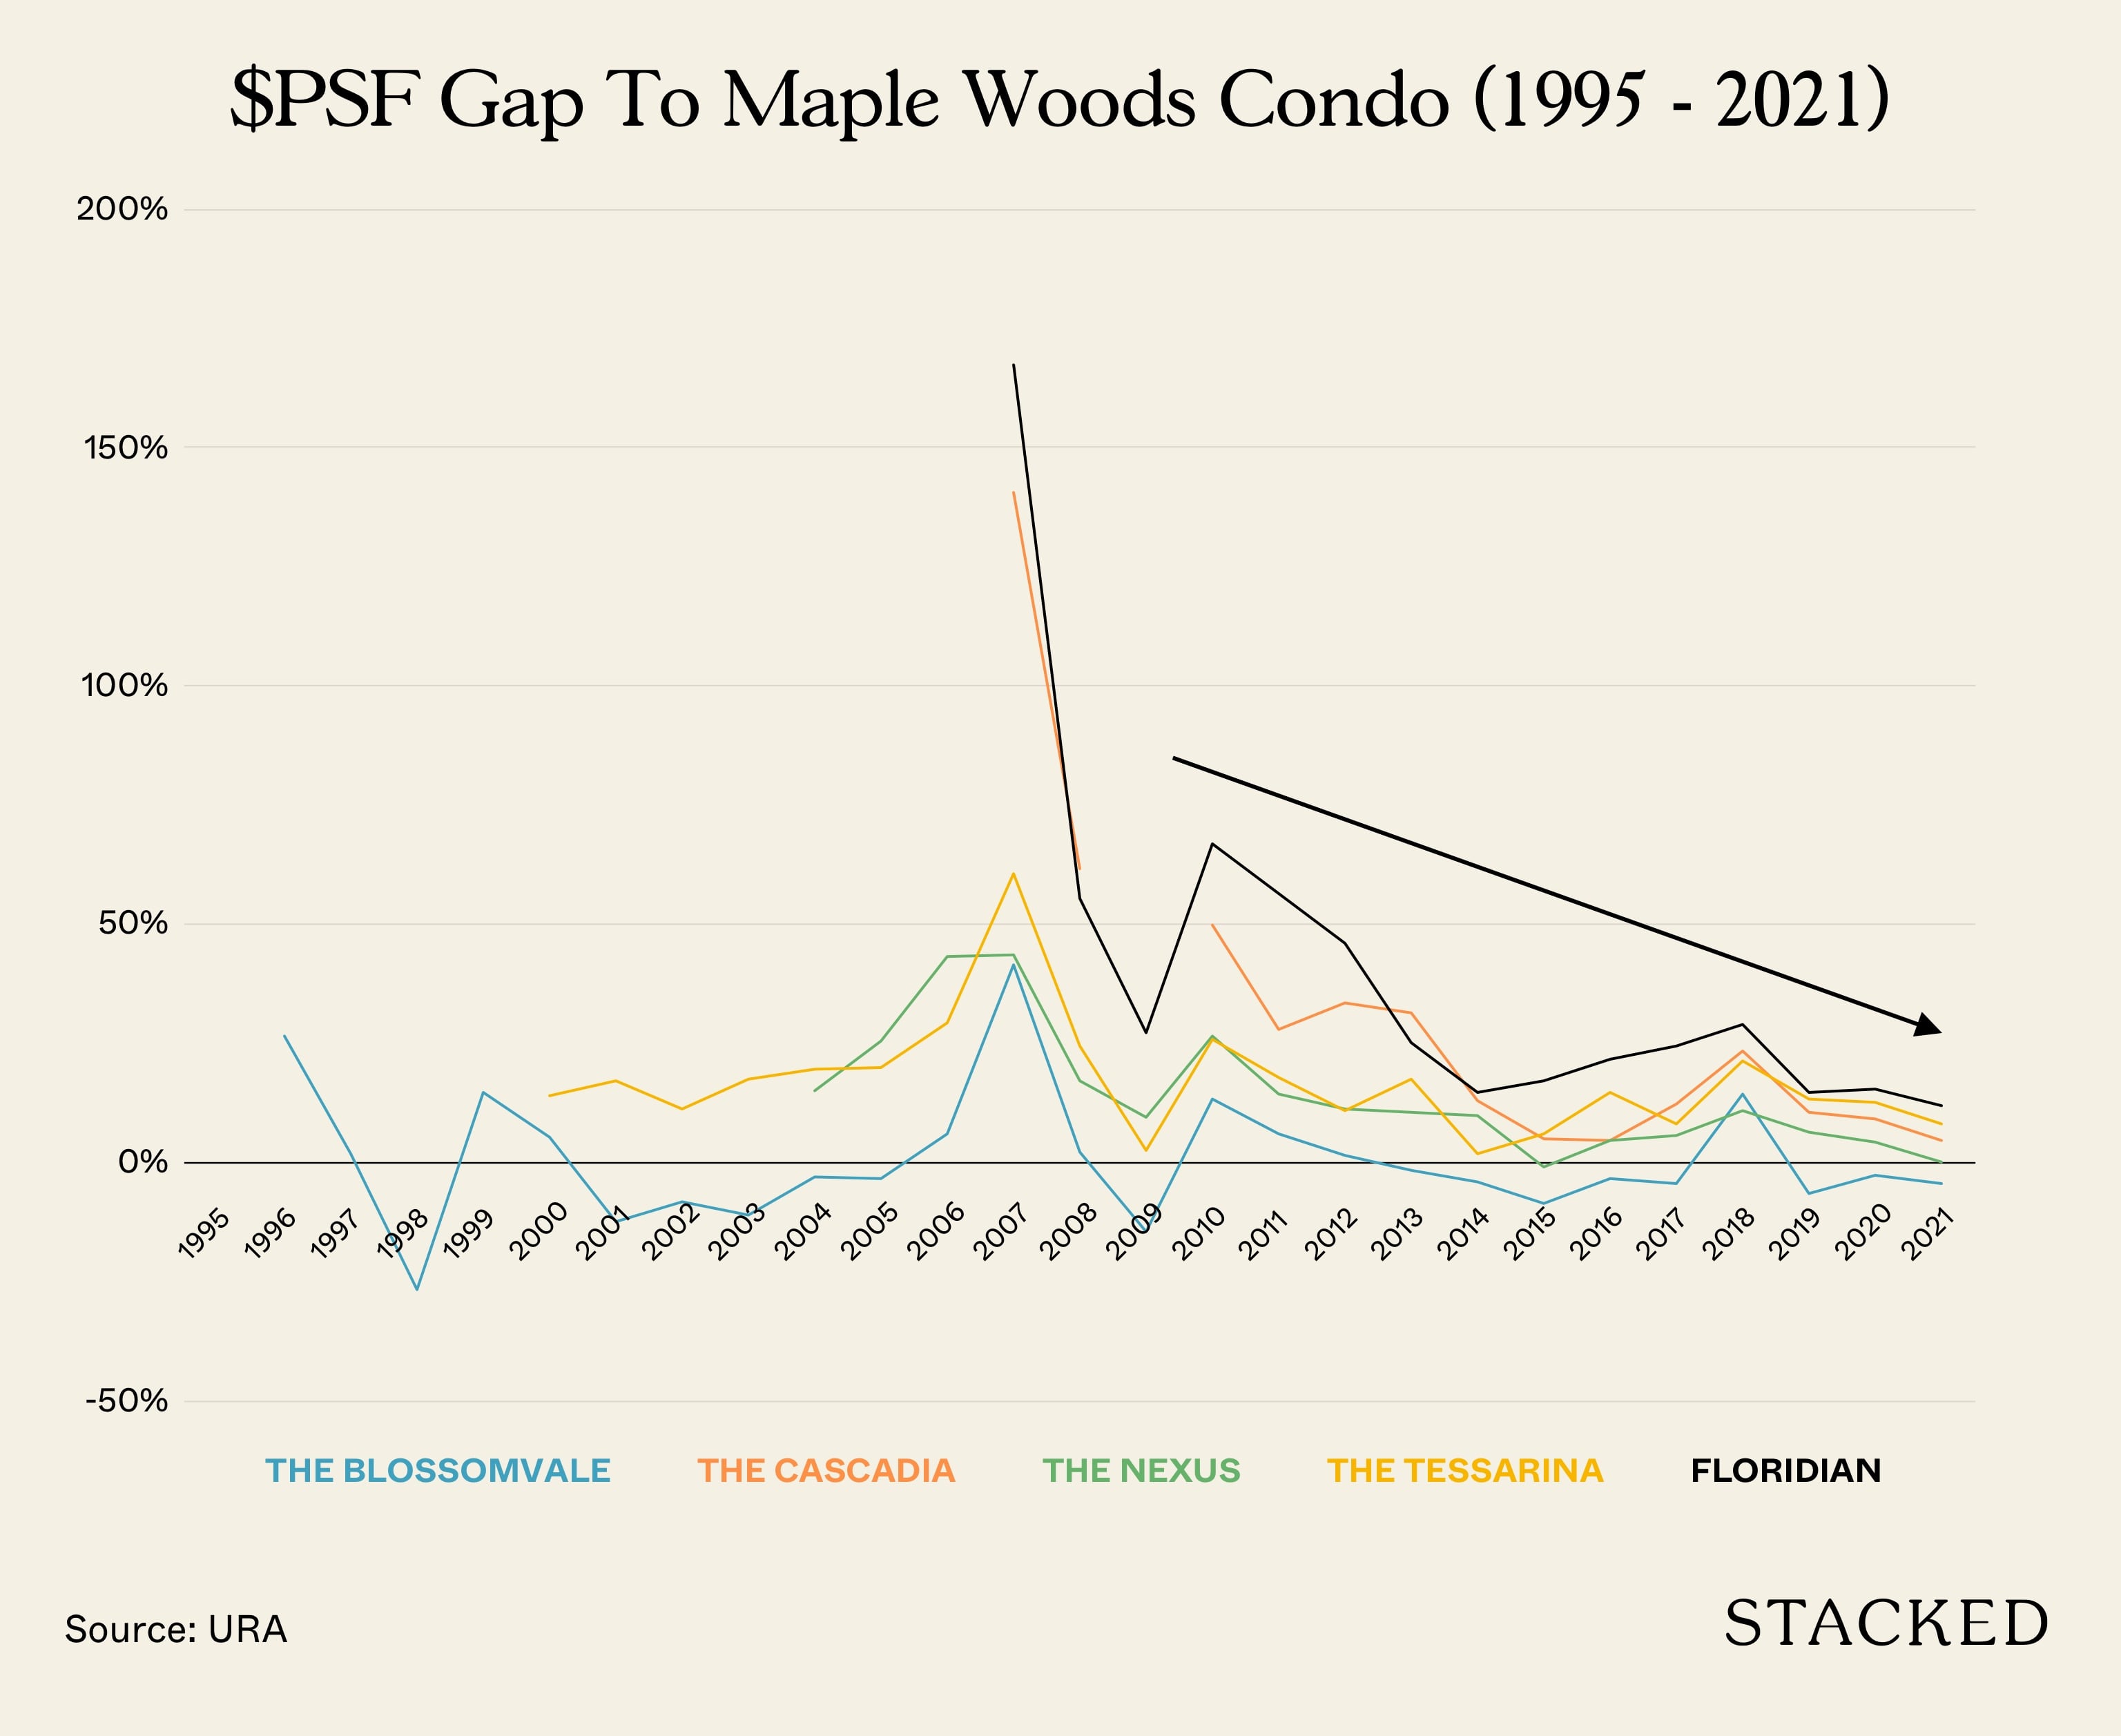 PSF Gap To Maple Woods Condo 1995 2021